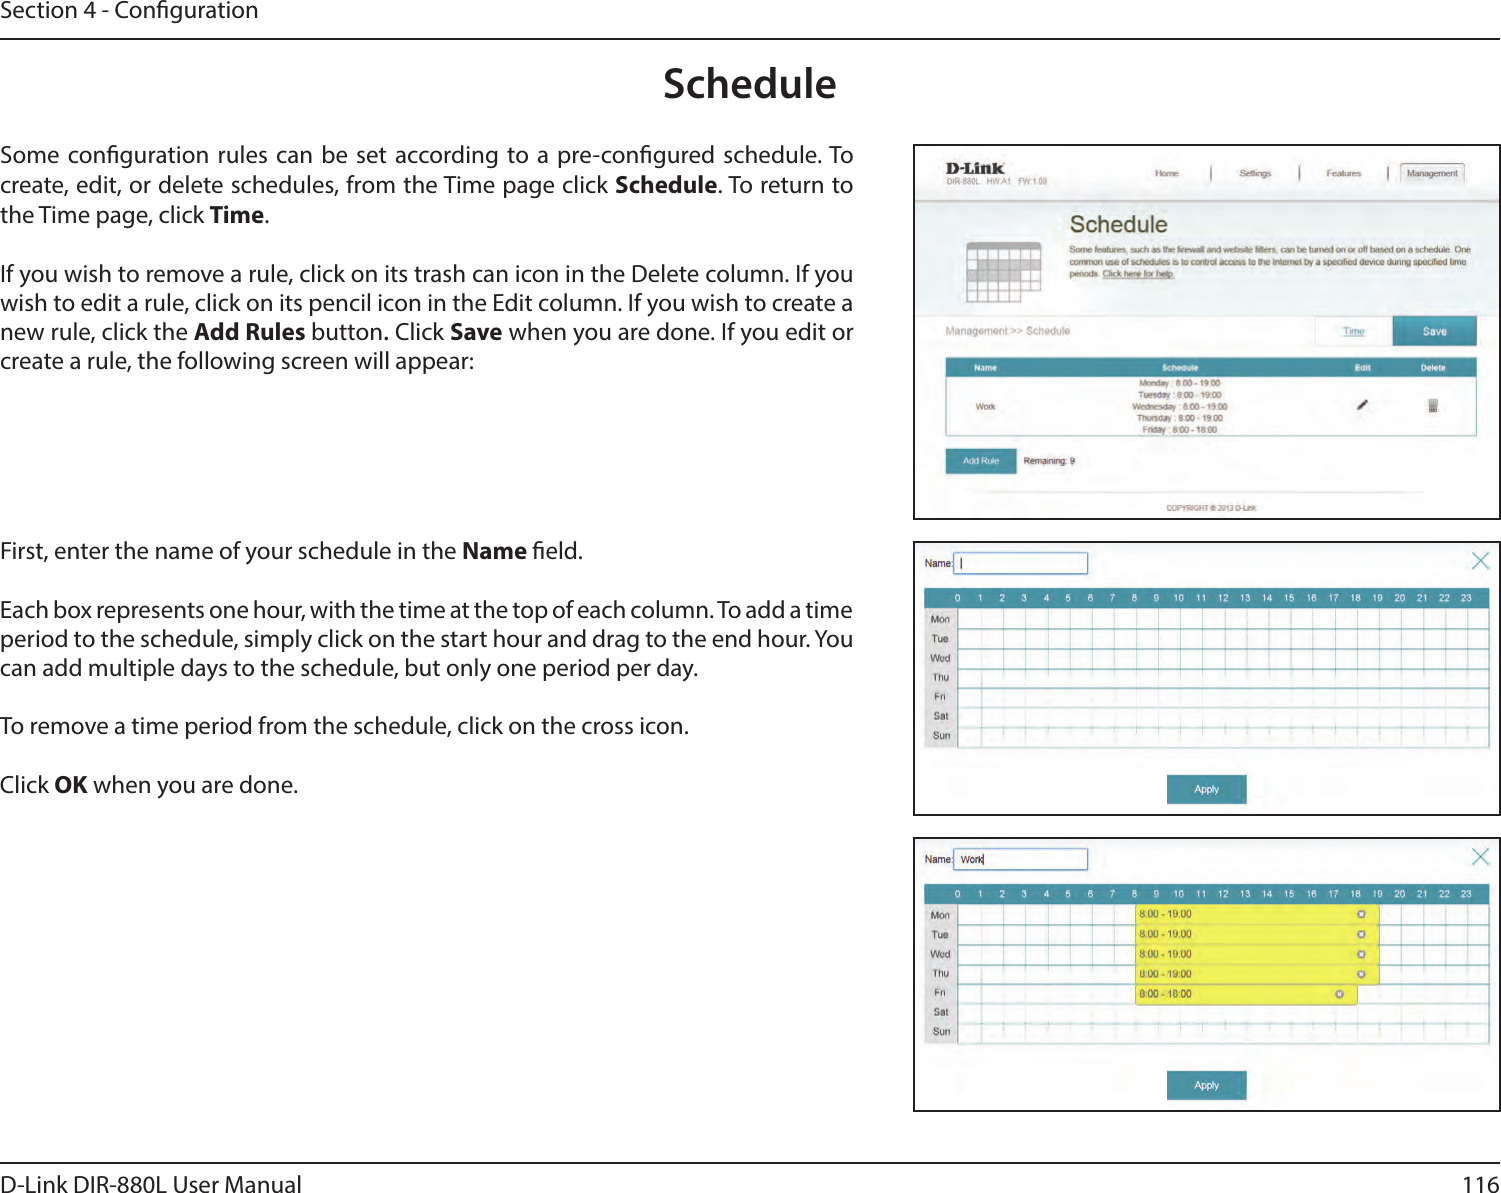 116D-Link DIR-880L User ManualSection 4 - CongurationScheduleSome conguration rules can be set according to a pre-congured schedule. To create, edit, or delete schedules, from the Time page click Schedule. To return to the Time page, click Time. If you wish to remove a rule, click on its trash can icon in the Delete column. If you wish to edit a rule, click on its pencil icon in the Edit column. If you wish to create a new rule, click the Add Rules button. Click Save when you are done. If you edit or create a rule, the following screen will appear:First, enter the name of your schedule in the Name eld.Each box represents one hour, with the time at the top of each column. To add a time period to the schedule, simply click on the start hour and drag to the end hour. You can add multiple days to the schedule, but only one period per day.To remove a time period from the schedule, click on the cross icon.Click OK when you are done.